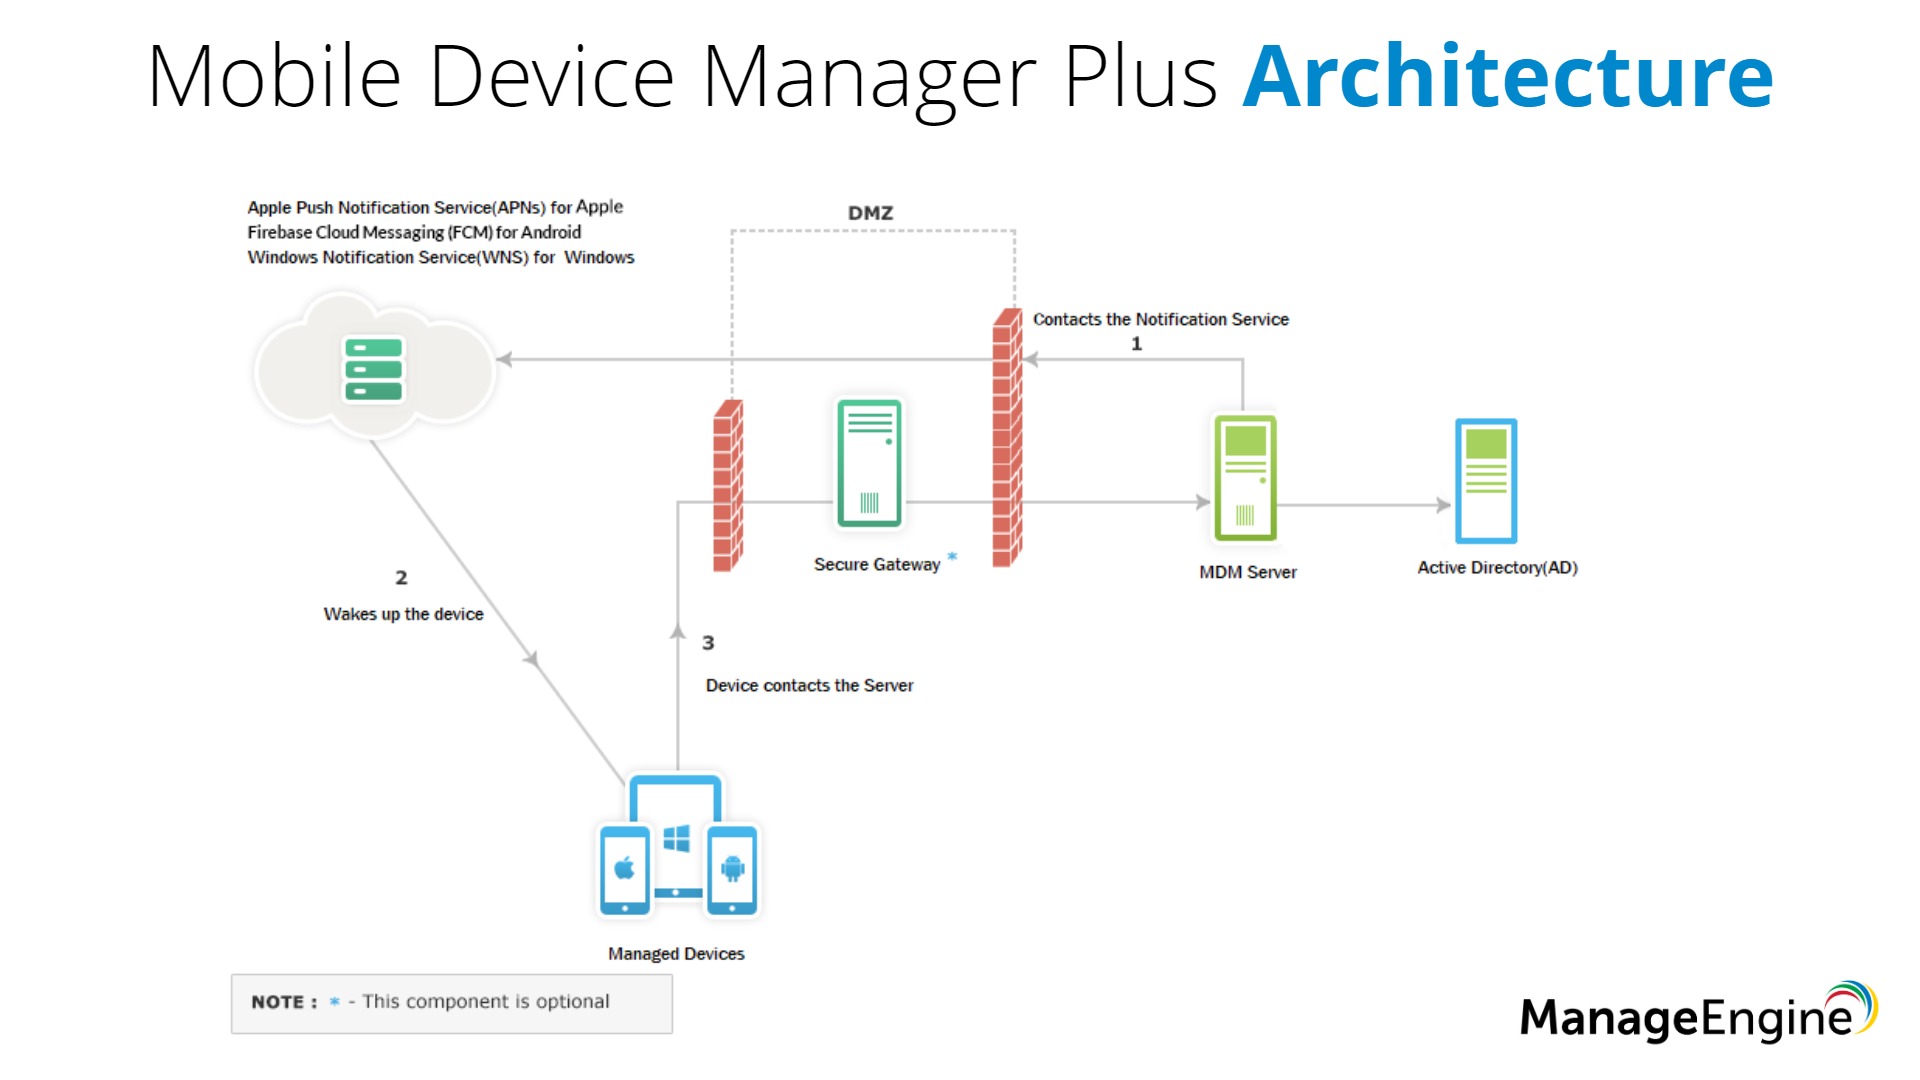 Mobile Device Manager Plus Architecture